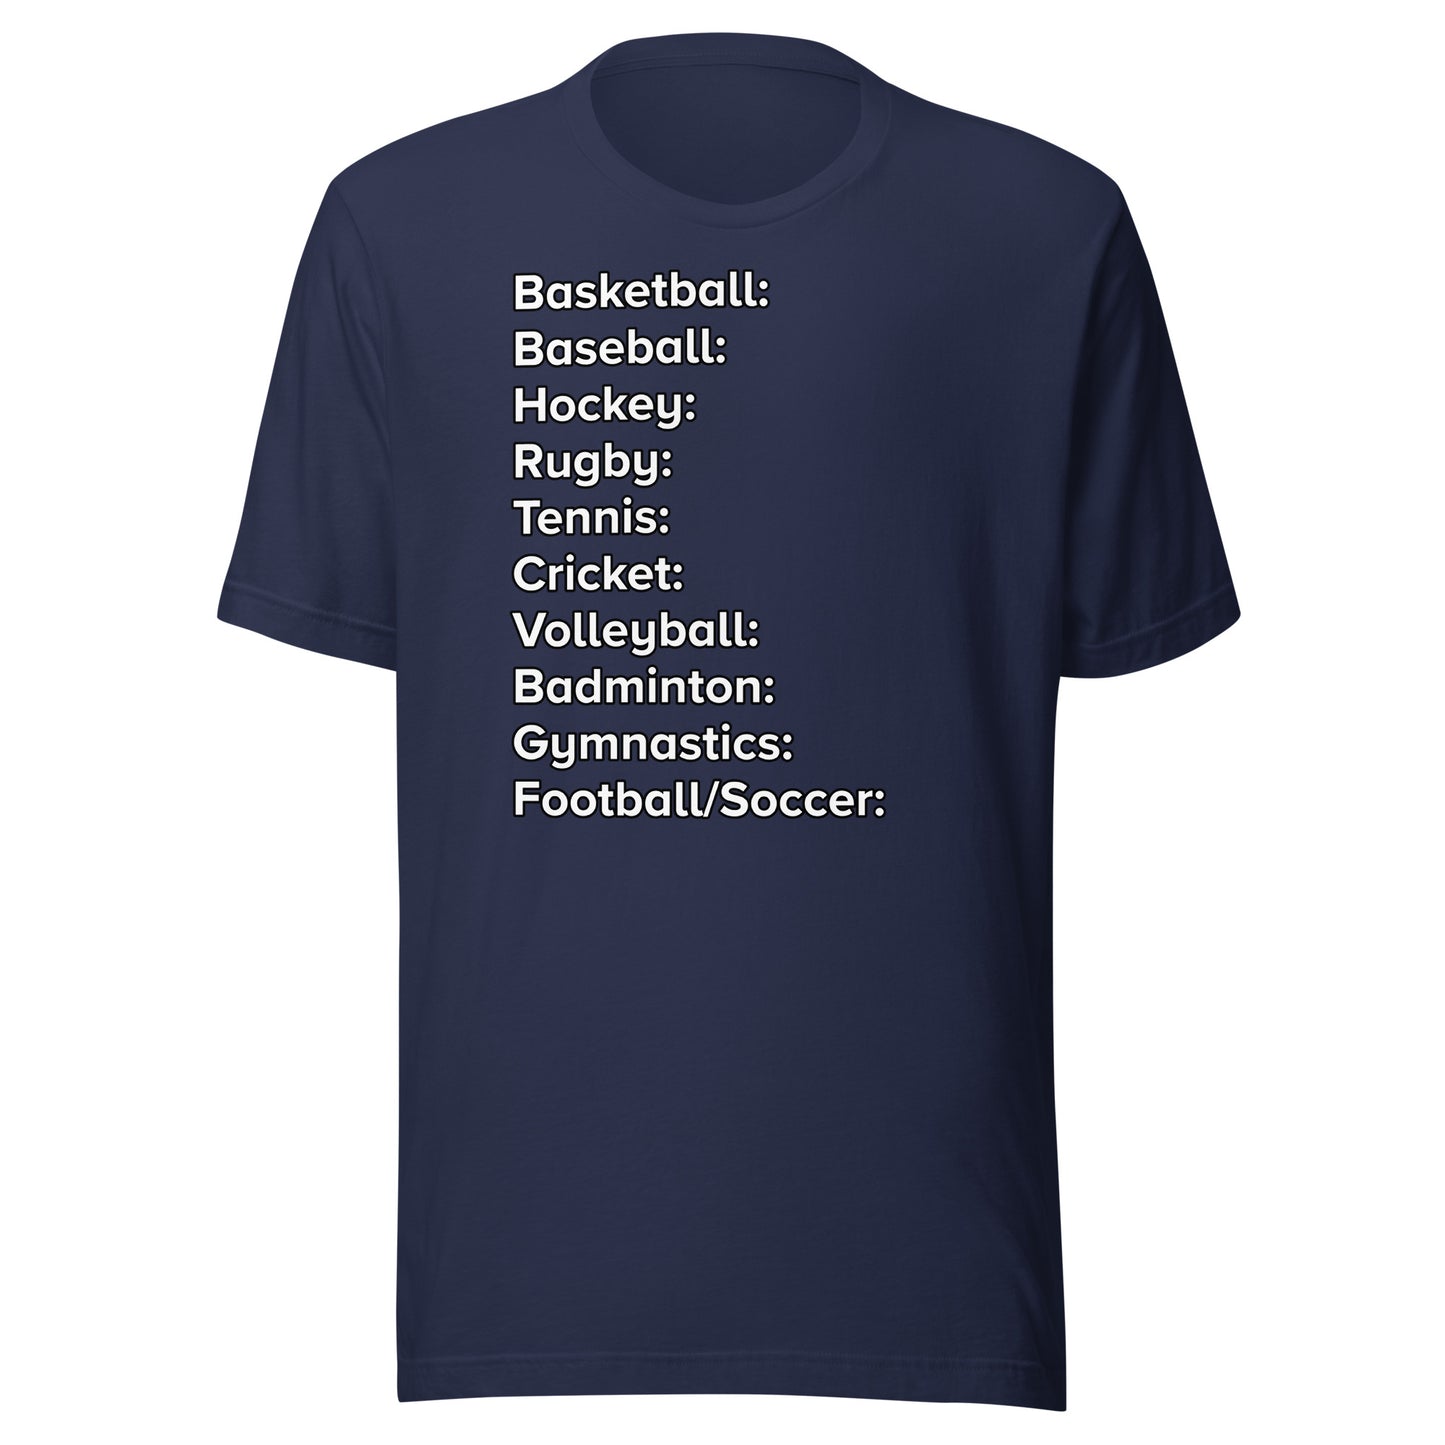 'The 10 Sports' T-shirt